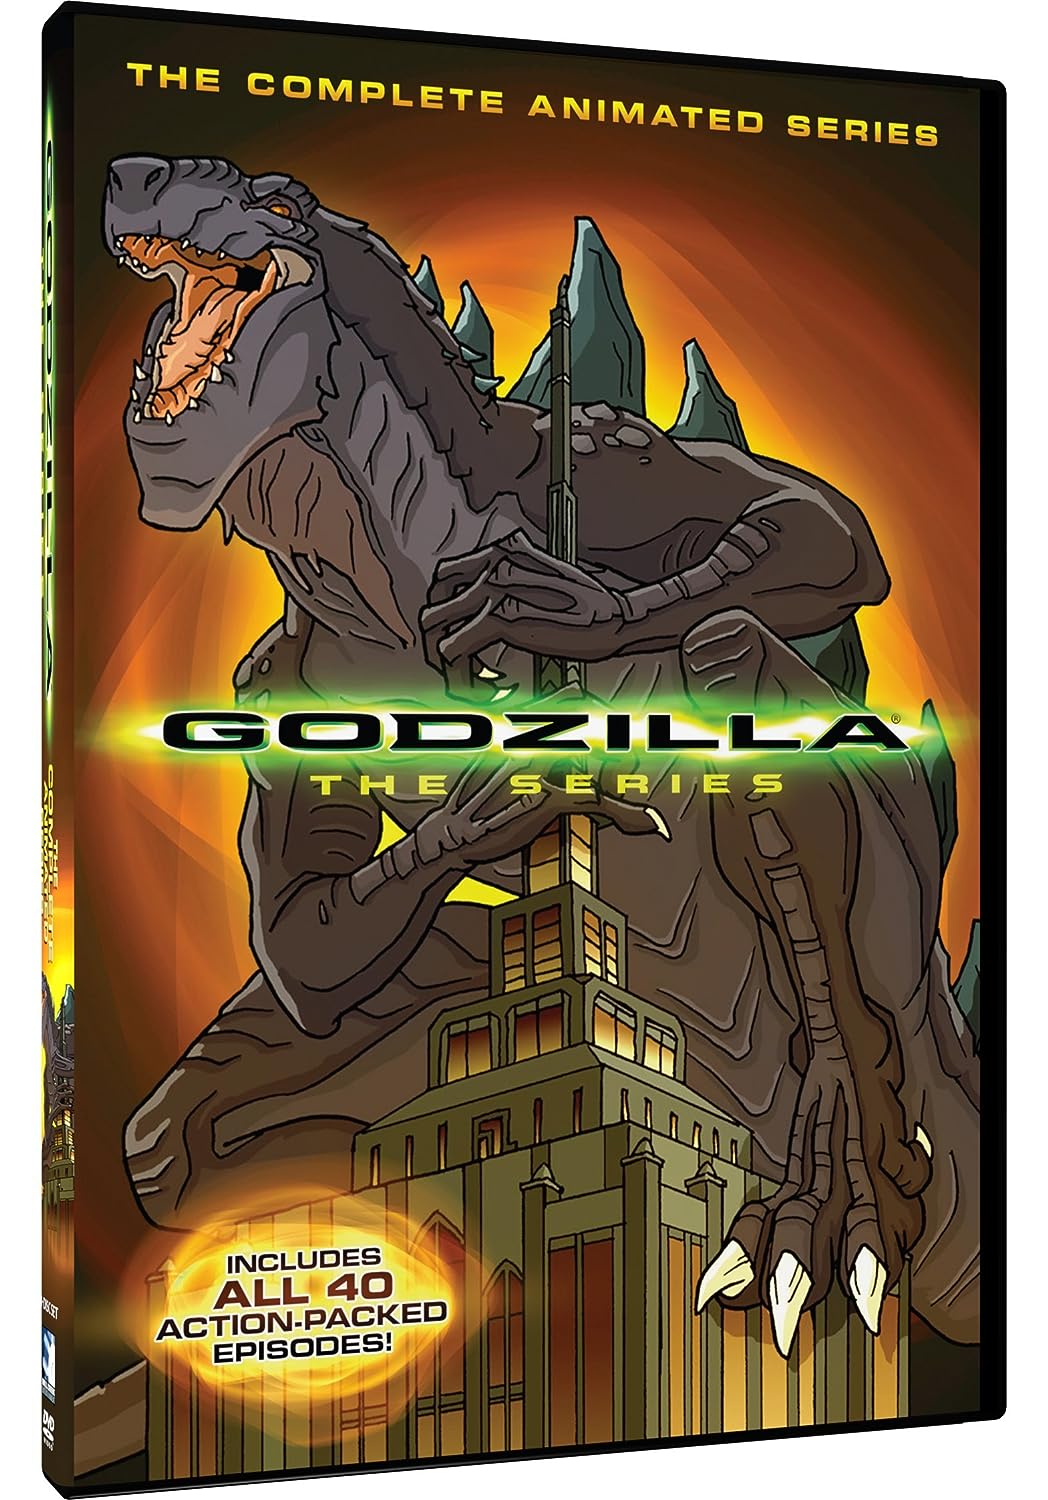 Godzilla: The Complete Animated Series (DVD) $4 + Free Shipping